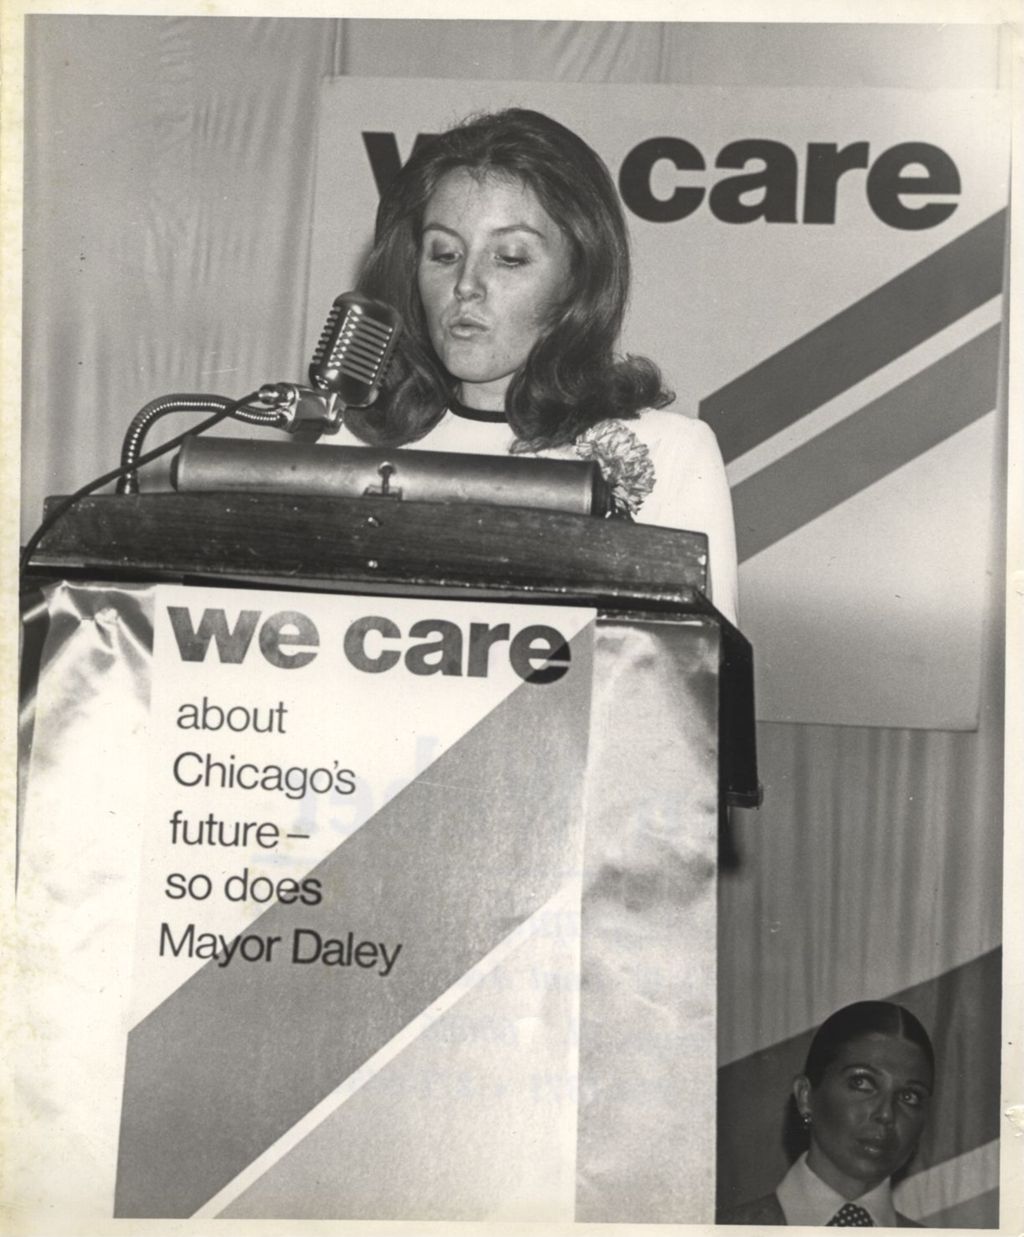 Woman speaking at a podium at a "We Care" event